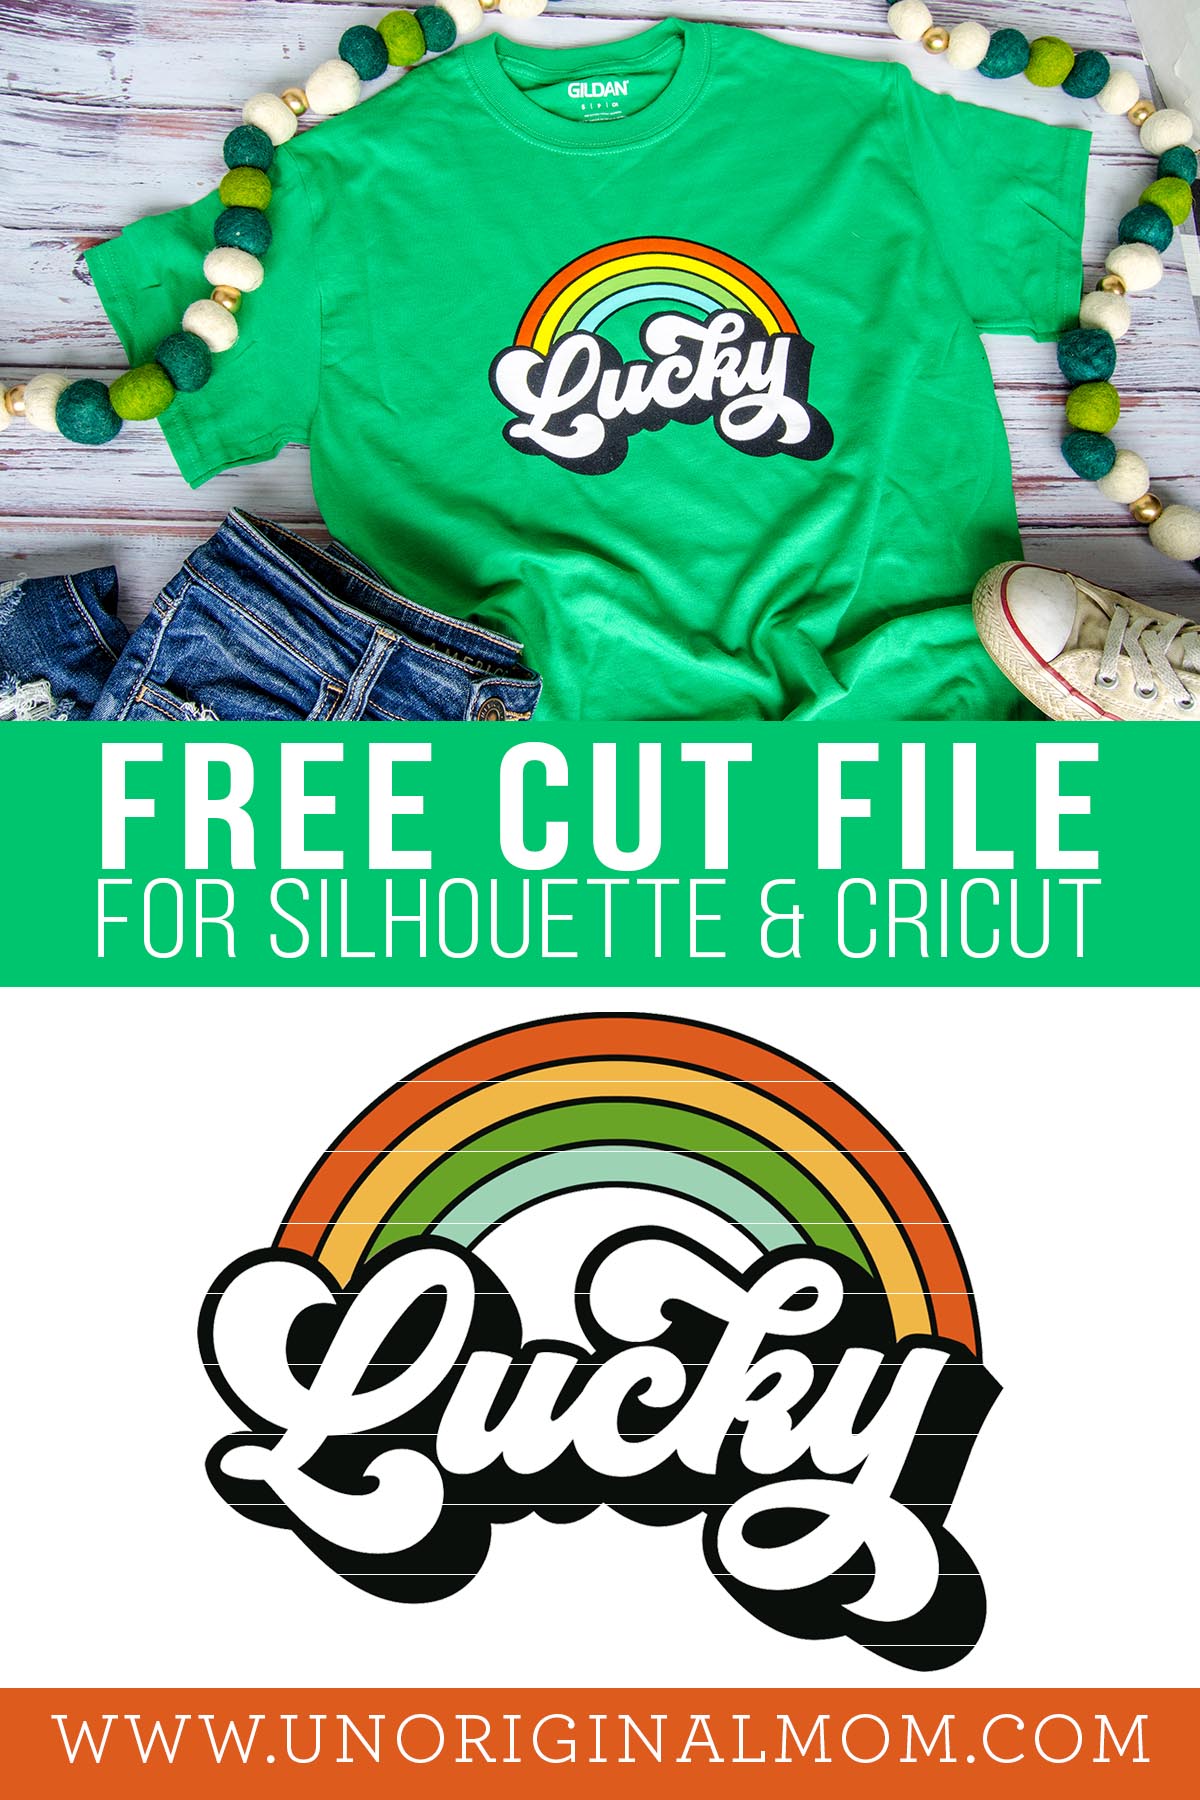 Free St. Patrick's Day SVG - includes a cut file for Silhouette and Cricut! Super fun retro "lucky" design, perfect for a graphic tee!